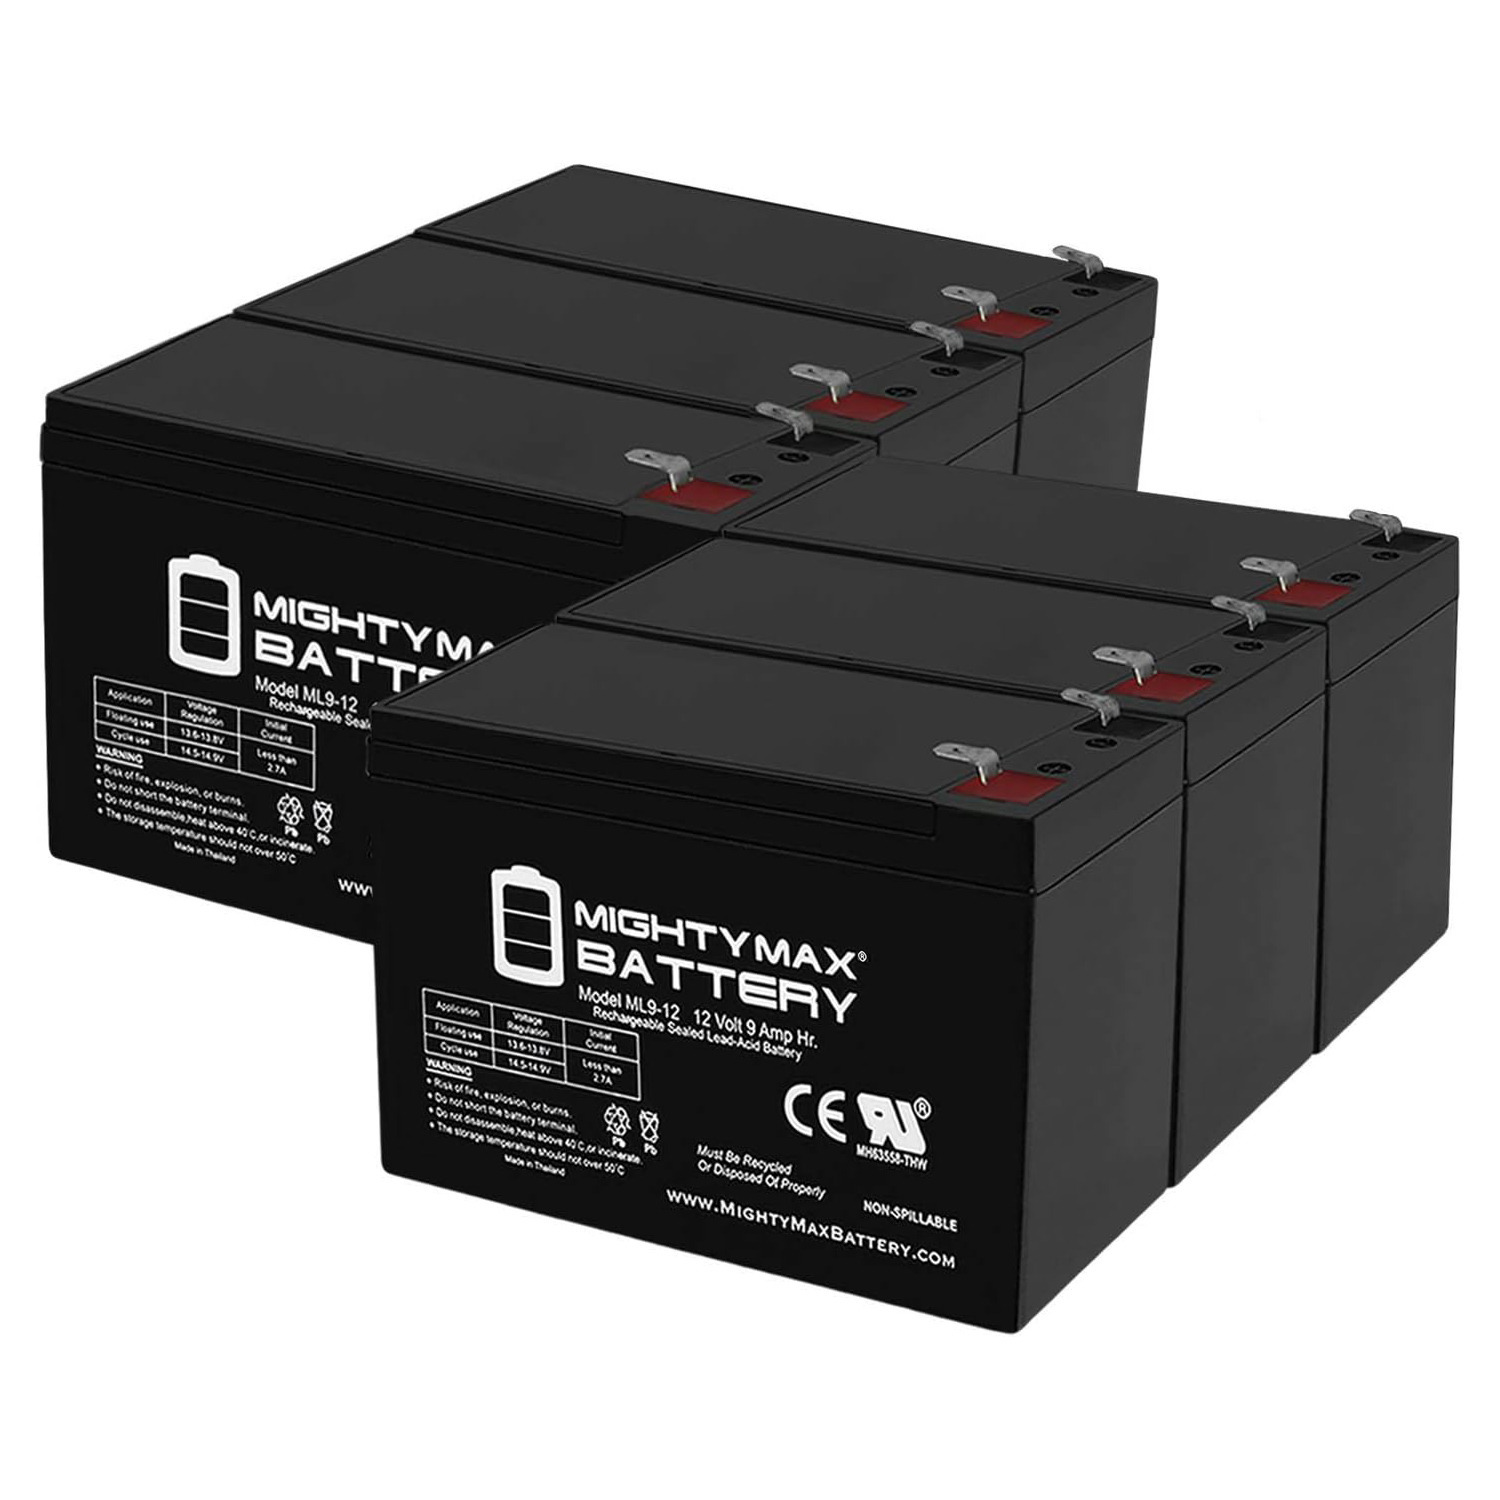 Altronix SMP7PMCTXPD8 12V, 9Ah Lead Acid Battery - 6 Pack